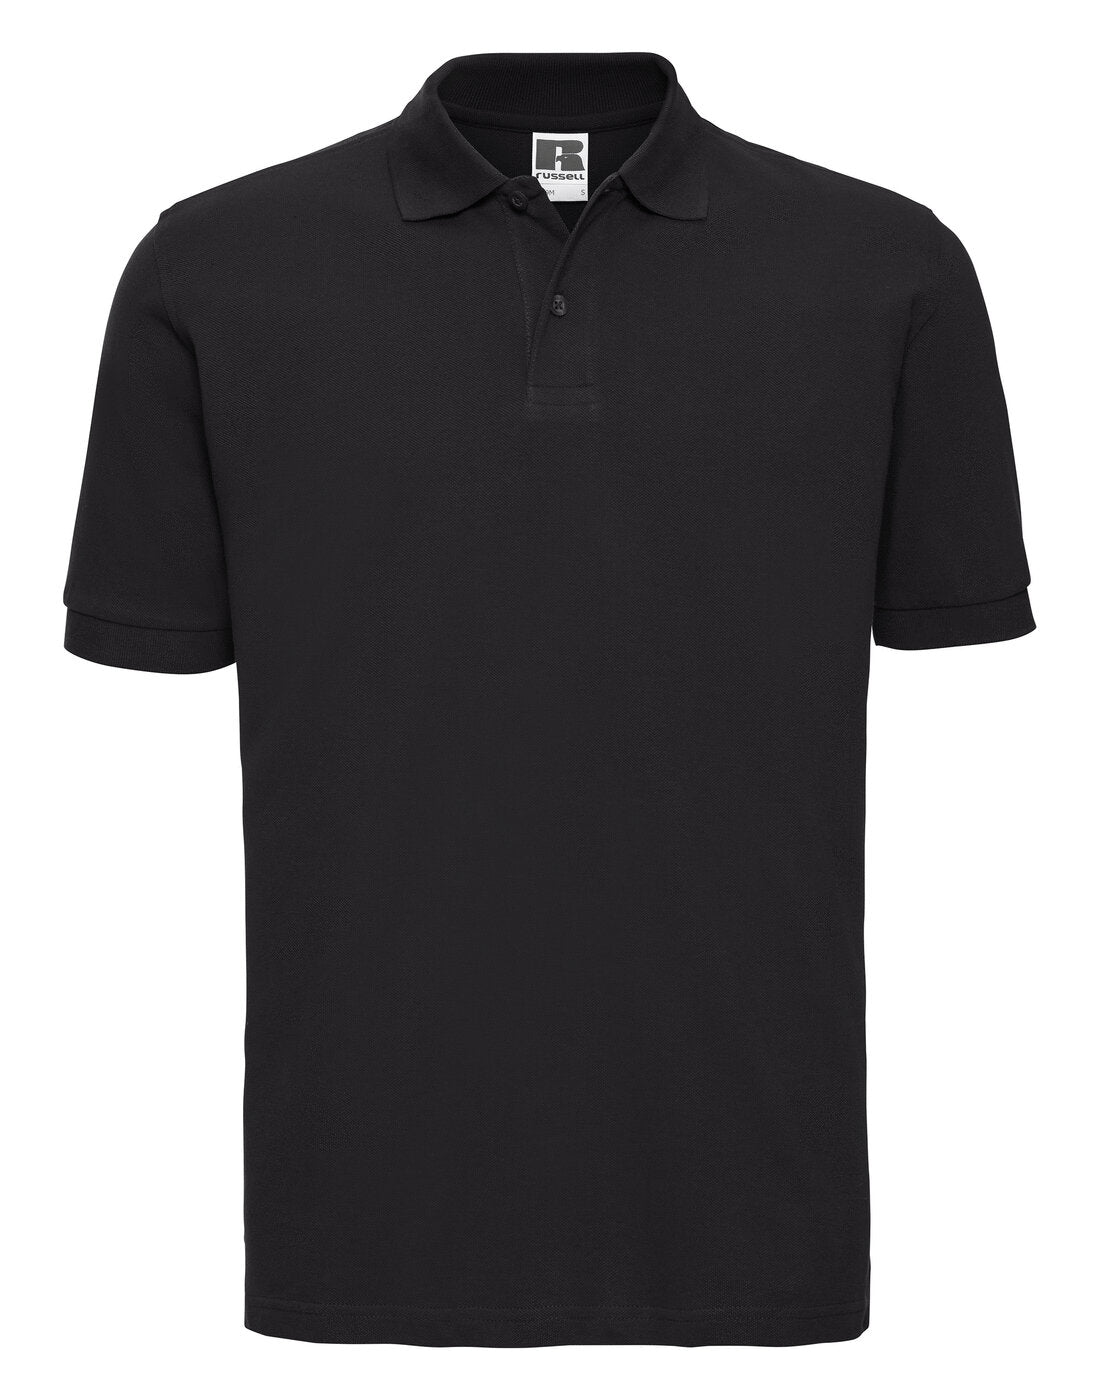 Russell Classic Cotton Polo - 569M Black